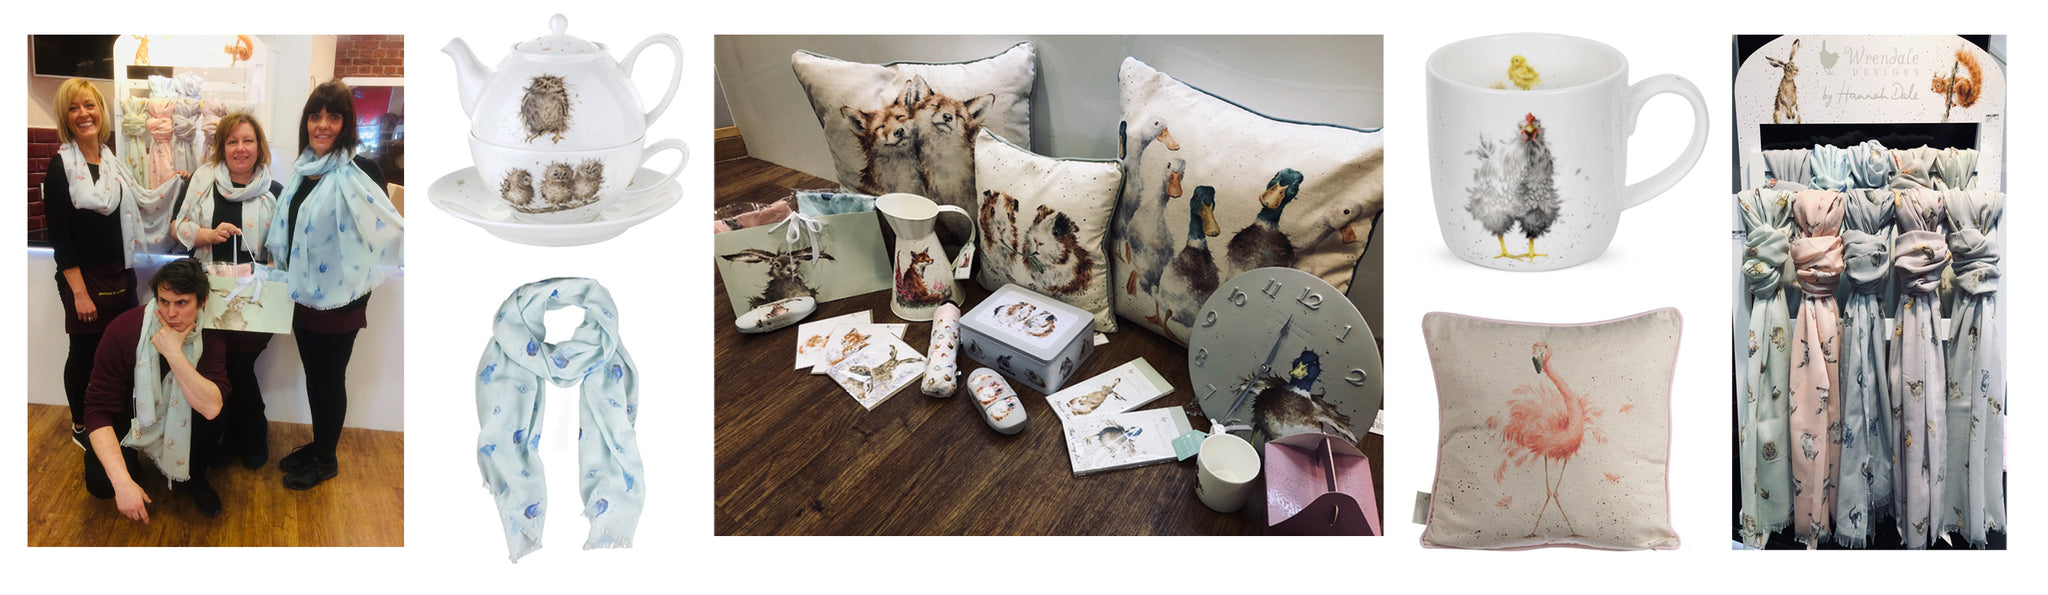 Buy Mother's day Gifts 2019 at Potters Cookshop